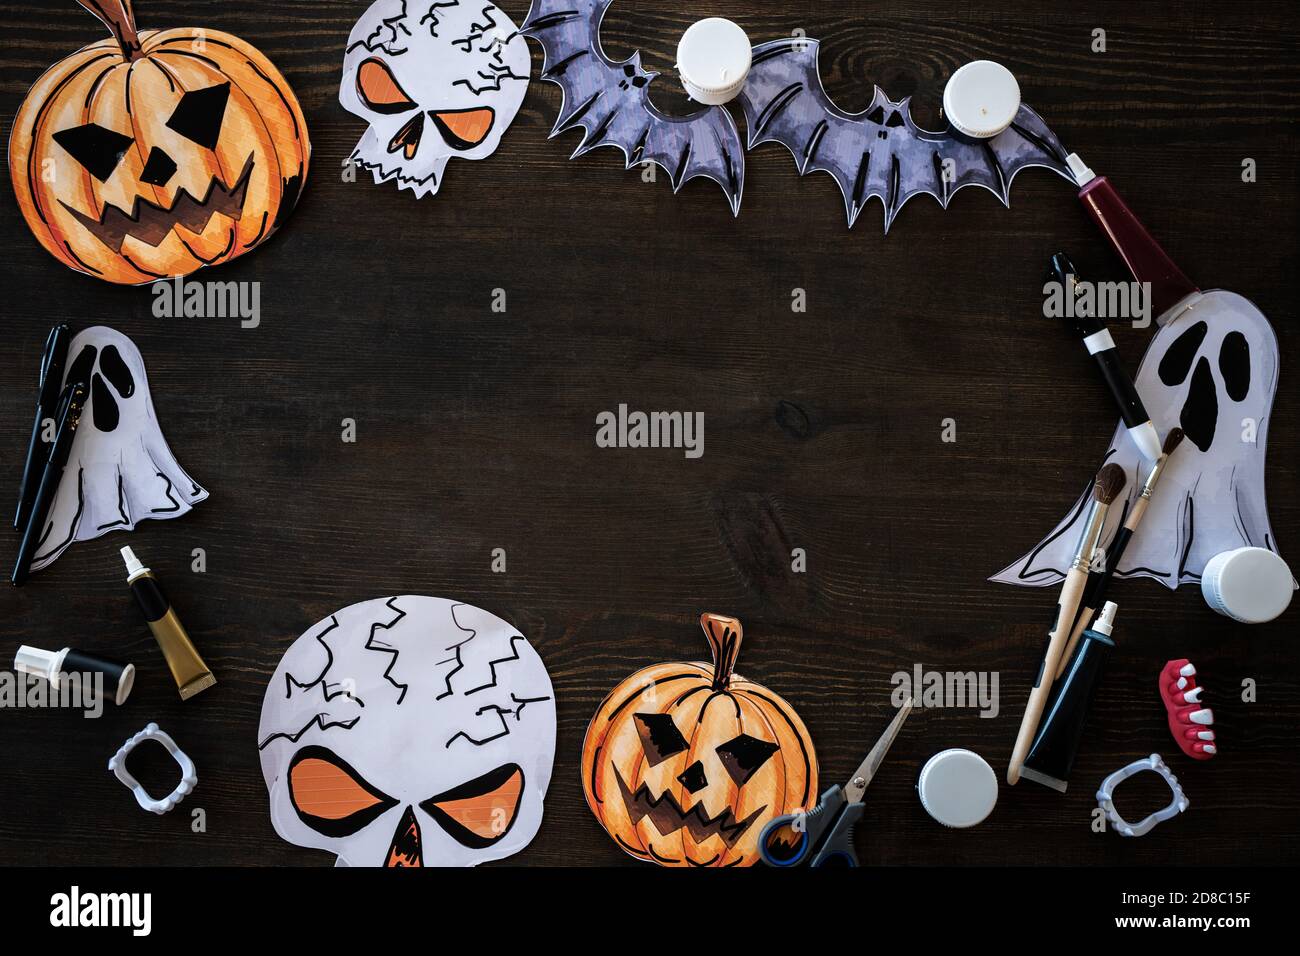 Halloween frame made of pumpkin, rat, ghost and skeleton paper pictures placed with art supplies on wooden table Stock Photo